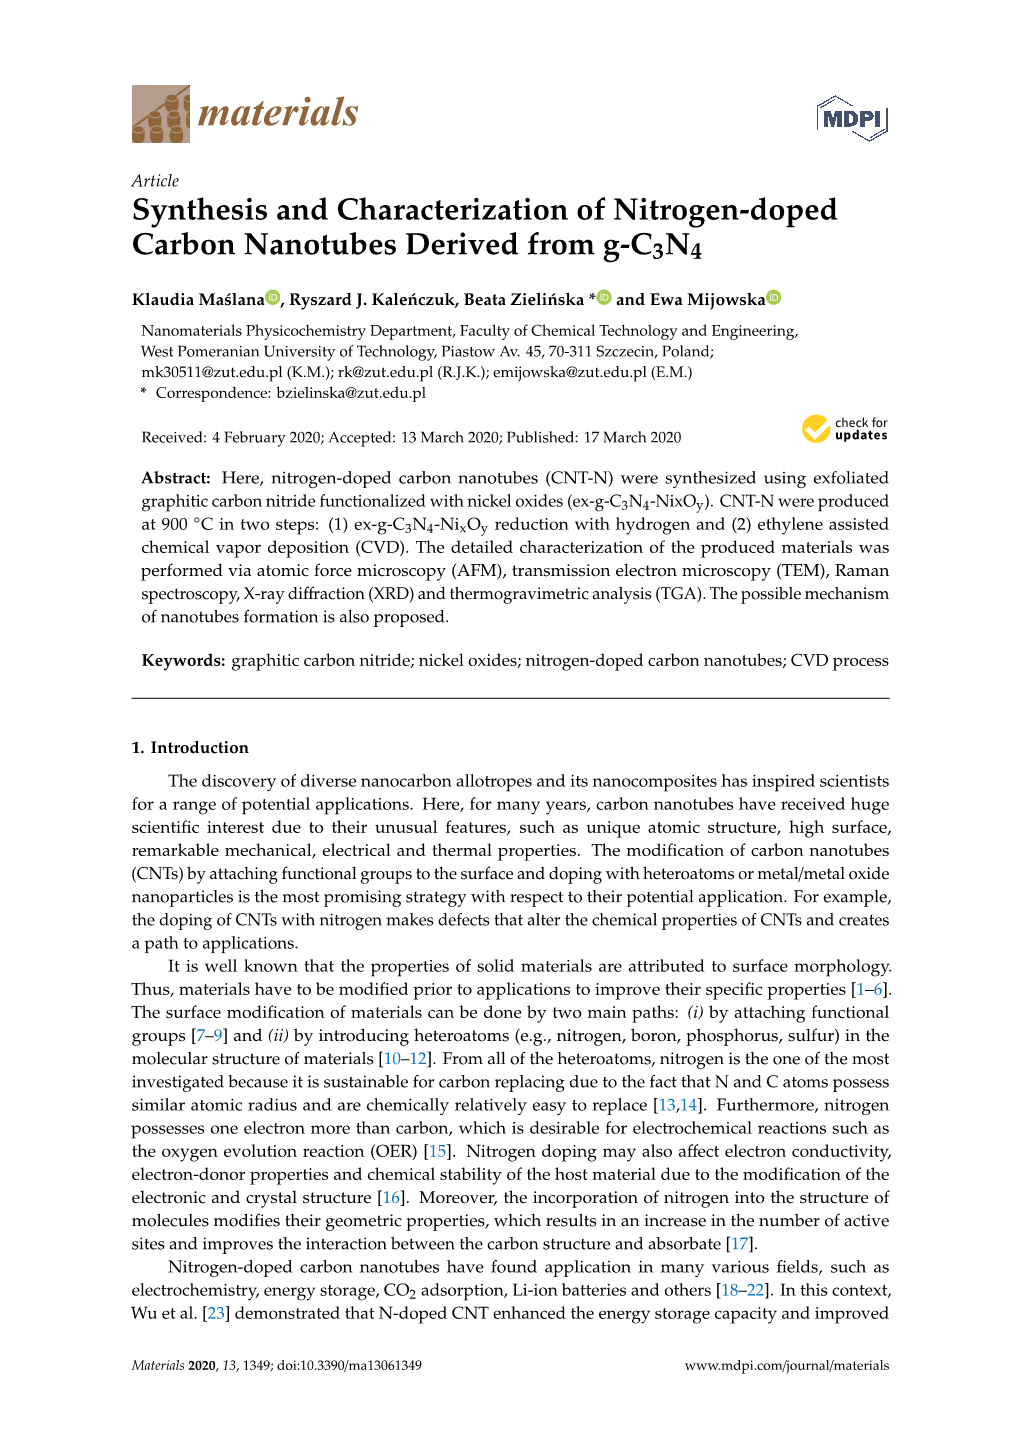 Synthesis and Characterization of Nitrogen-Doped Carbon Nanotubes Derived from G-C3N4